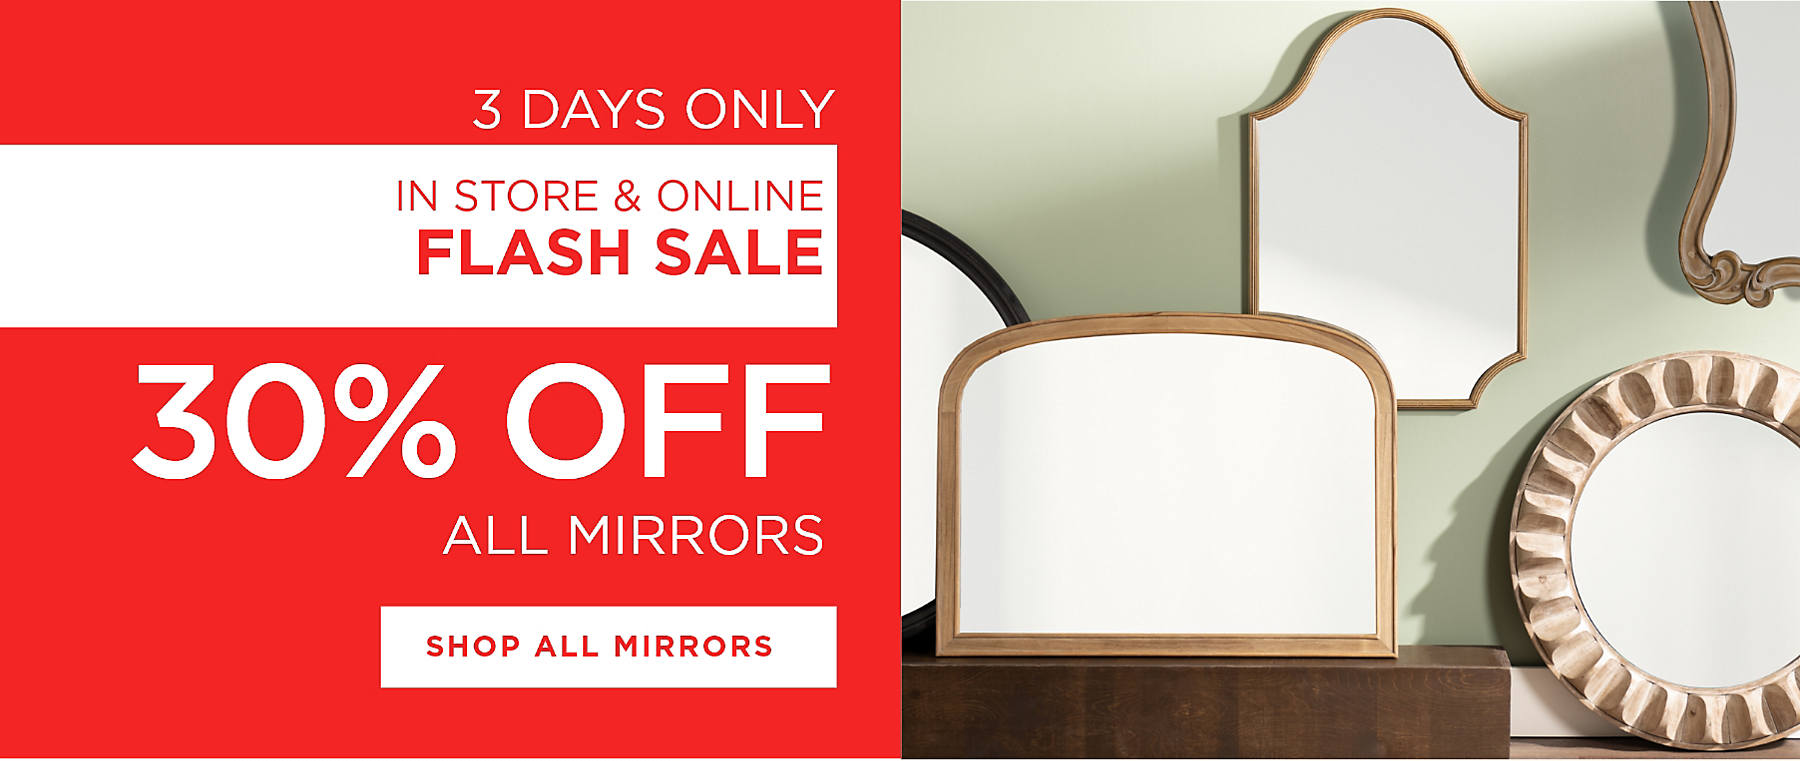 3 days only in store & online flash sale 30% off all mirrors shop all mirrors